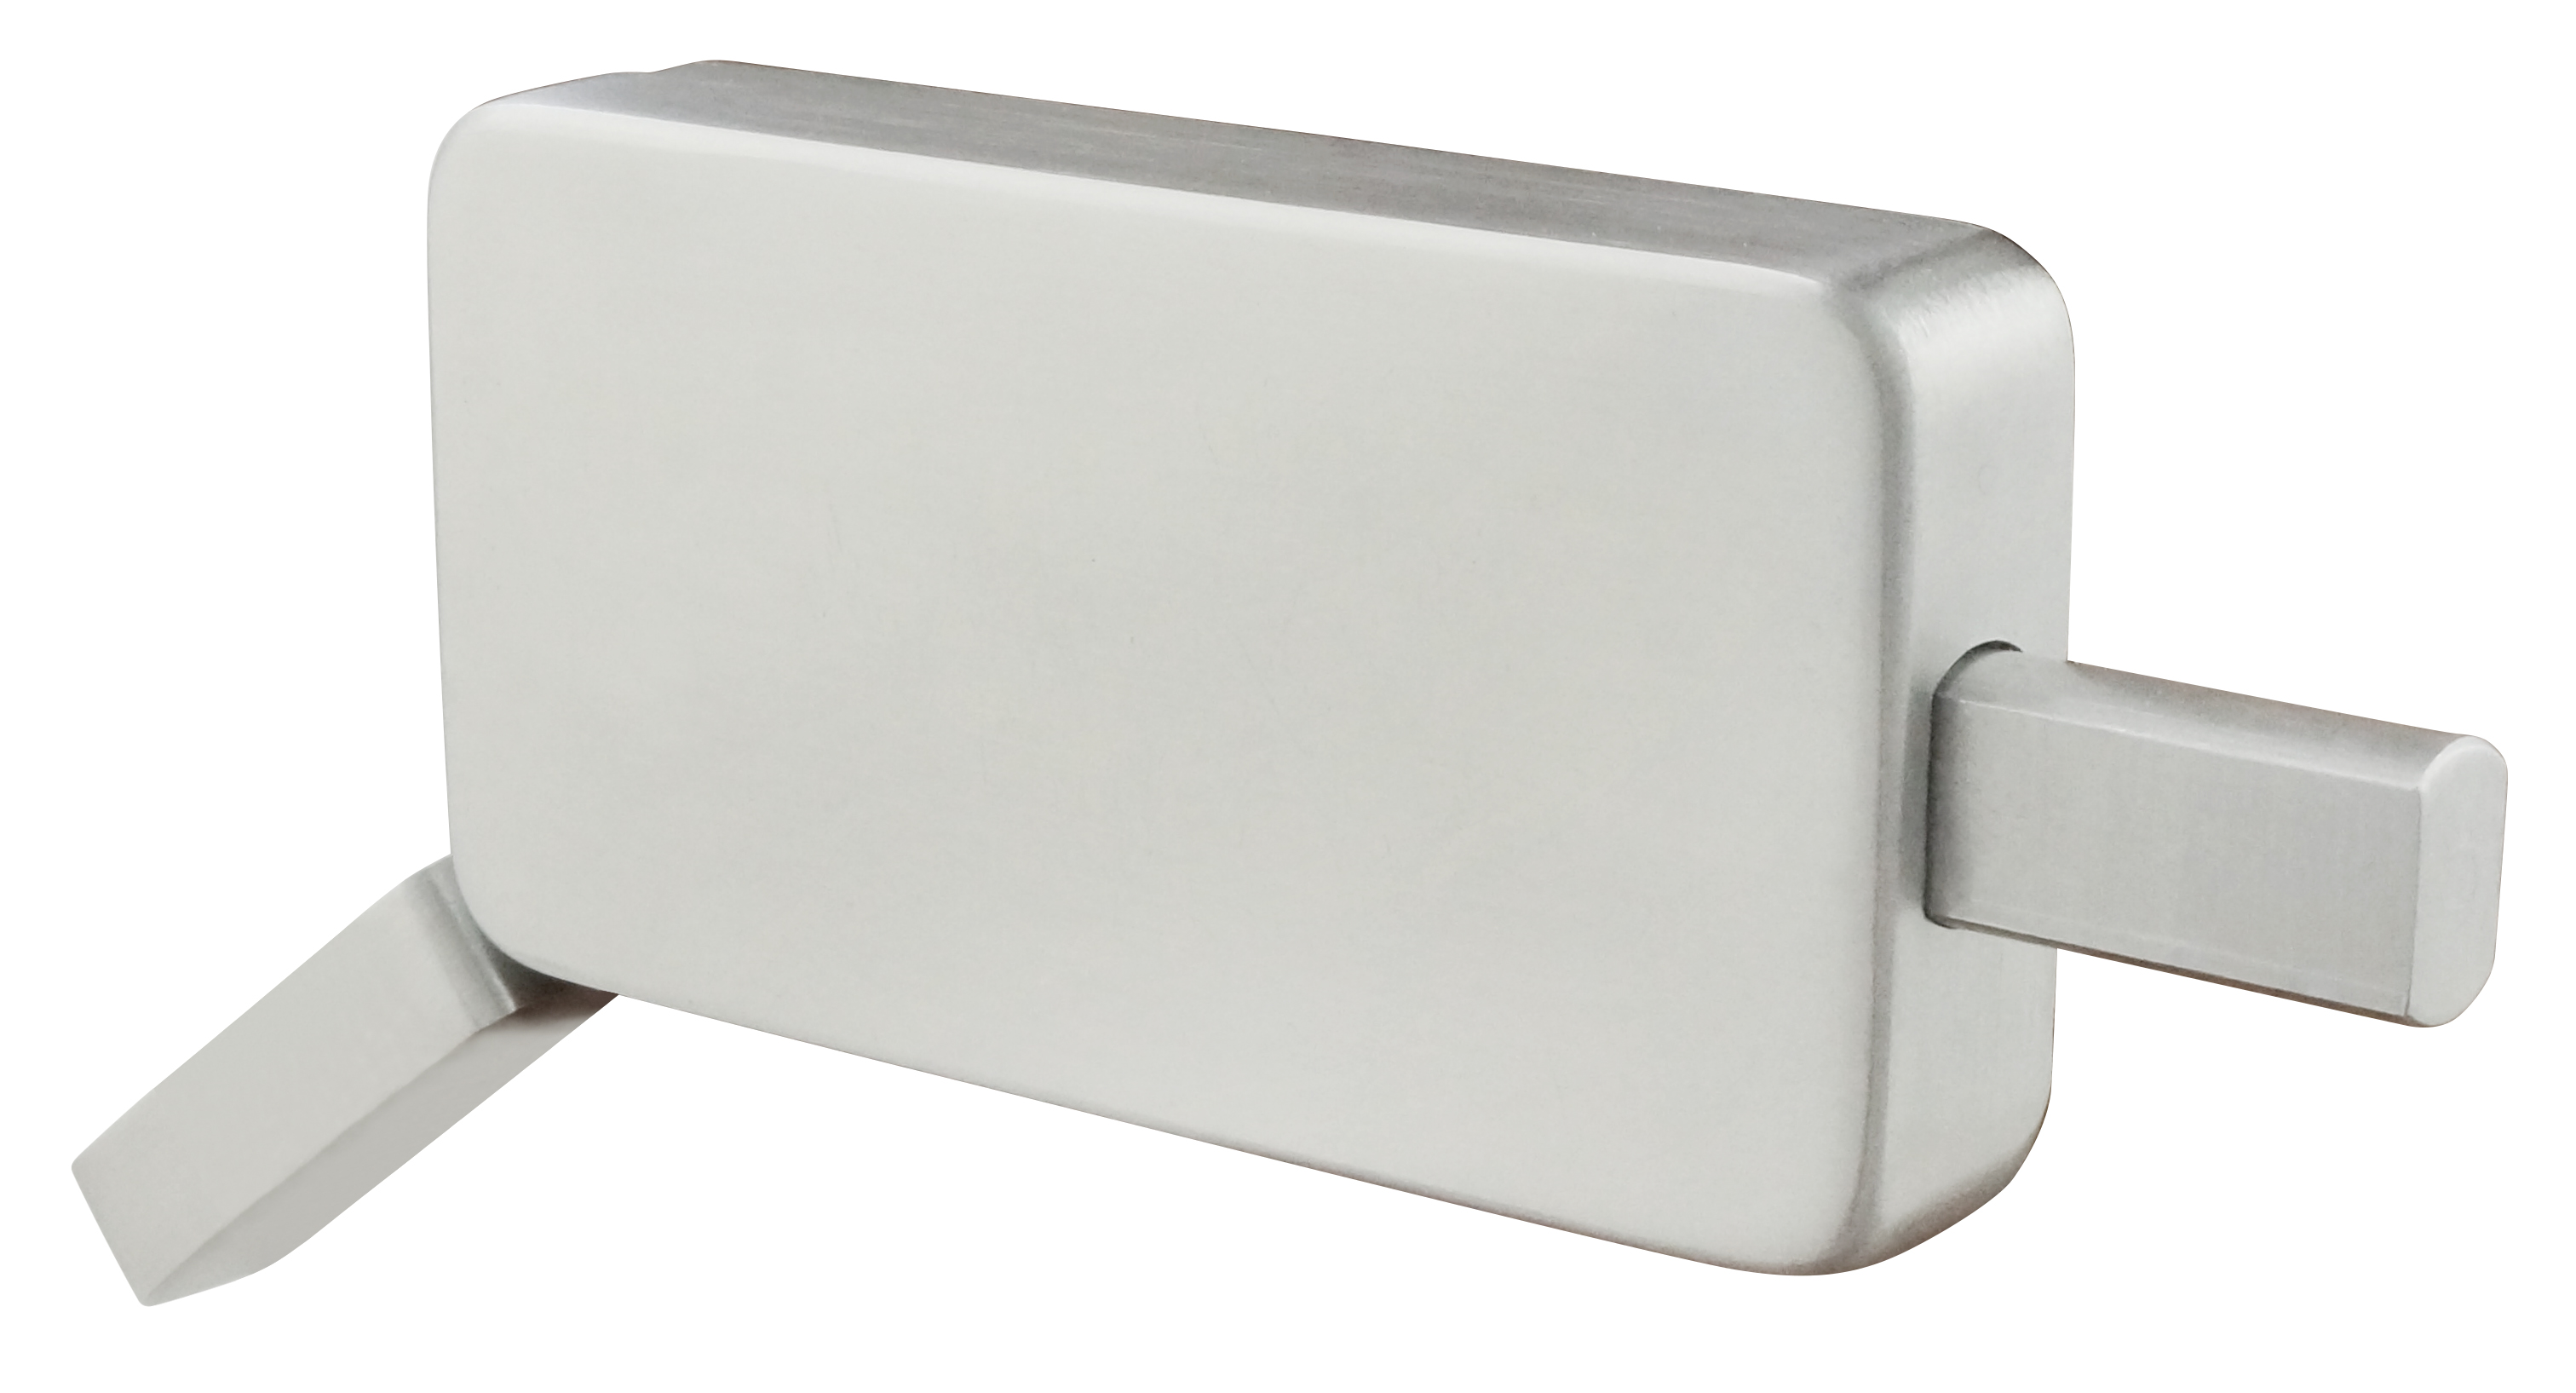 The INOX brand Surface Mount Barn Door Lock is billed by Unison Hardware as the first such lock crafted specifically for barn doors. With a design based on builder feedback requesting easier and quicker installation, the manufacturer touts a 15-minute install time with this product. The lock also is available in an ADA option (shown), which features a longer one-touch thumb lever to activate the 1-inch bolt-locking mechanism.